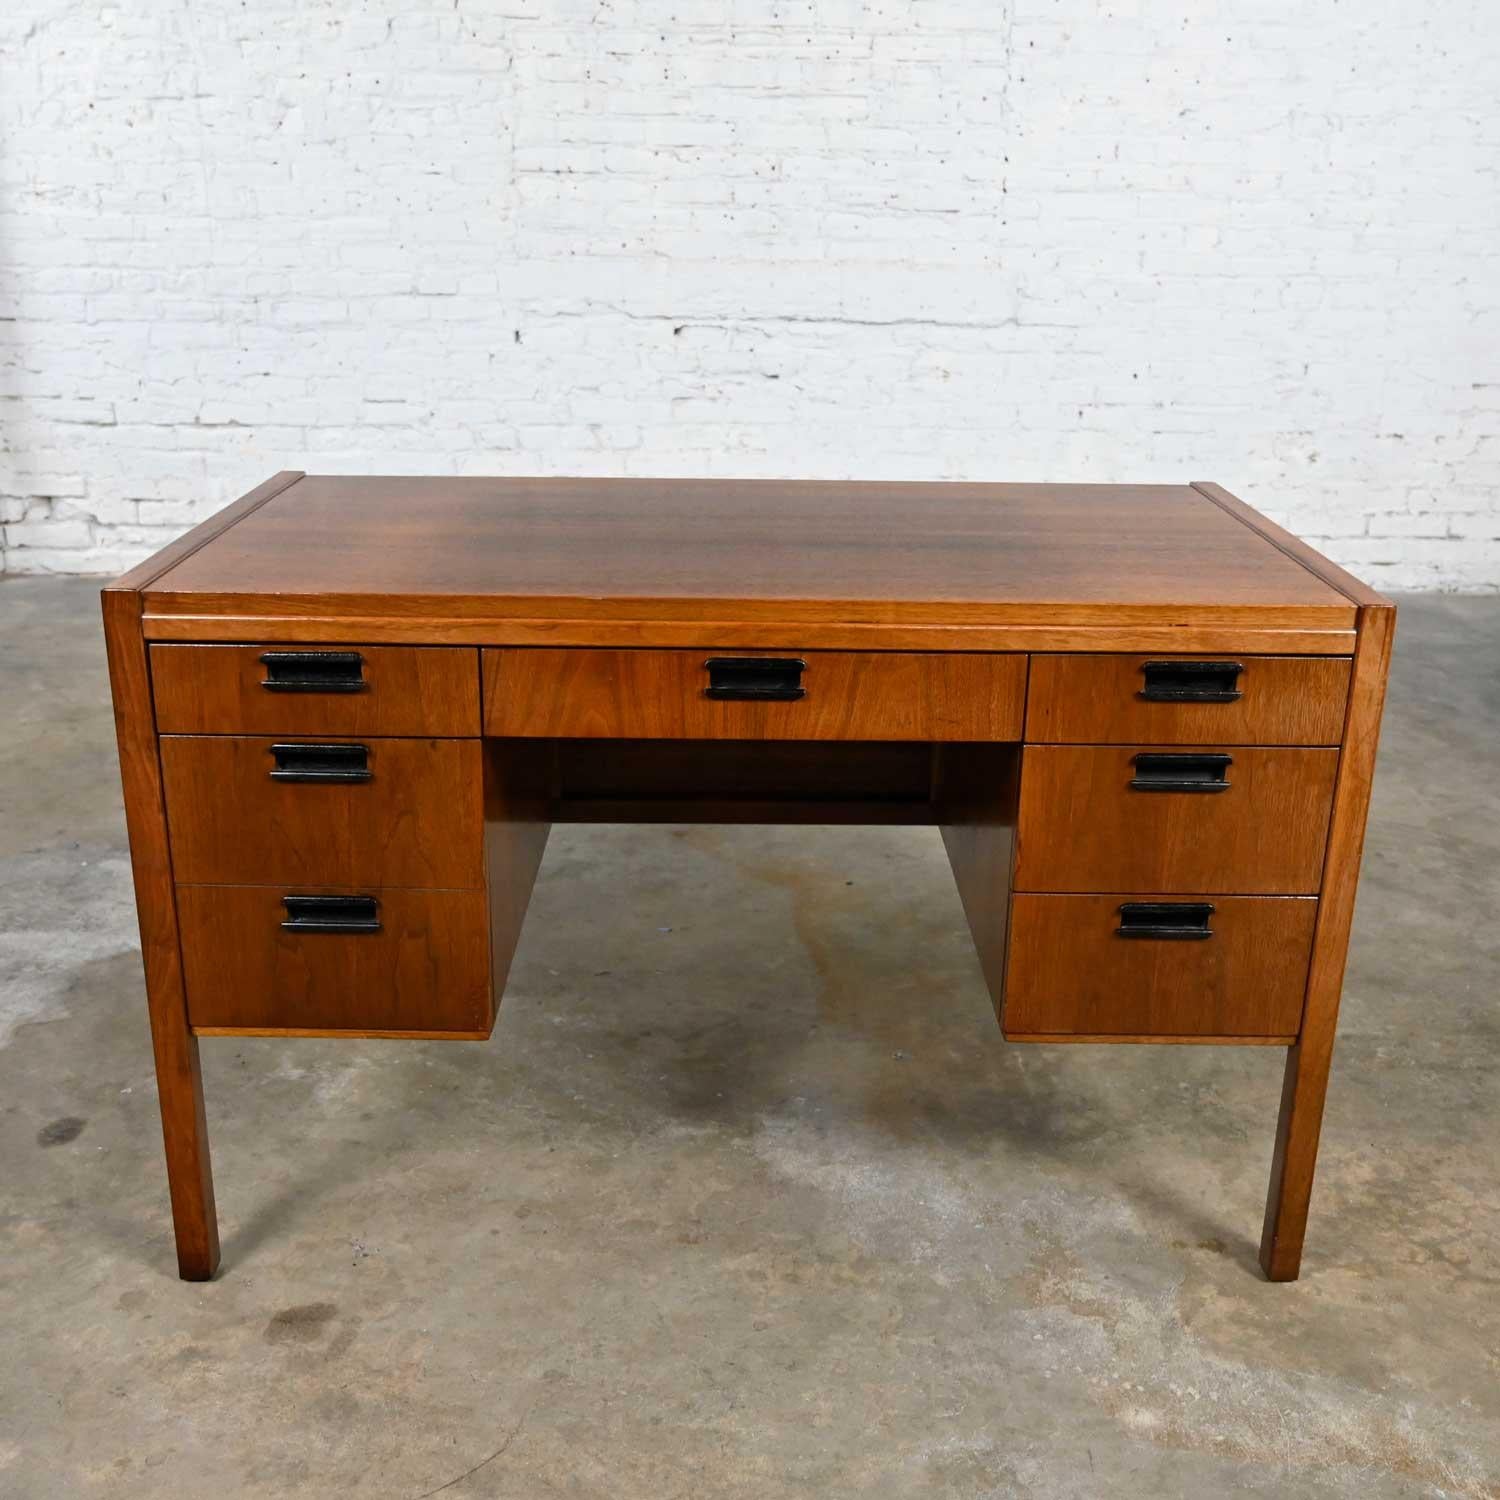 Gorgeous Mid-Century Modern Sligh-Lowry petite walnut veneer 6 drawer desk with cane front and black painted walnut handles. Beautiful condition, keeping in mind that this is vintage and not new so will have signs of use and wear. There is a faded